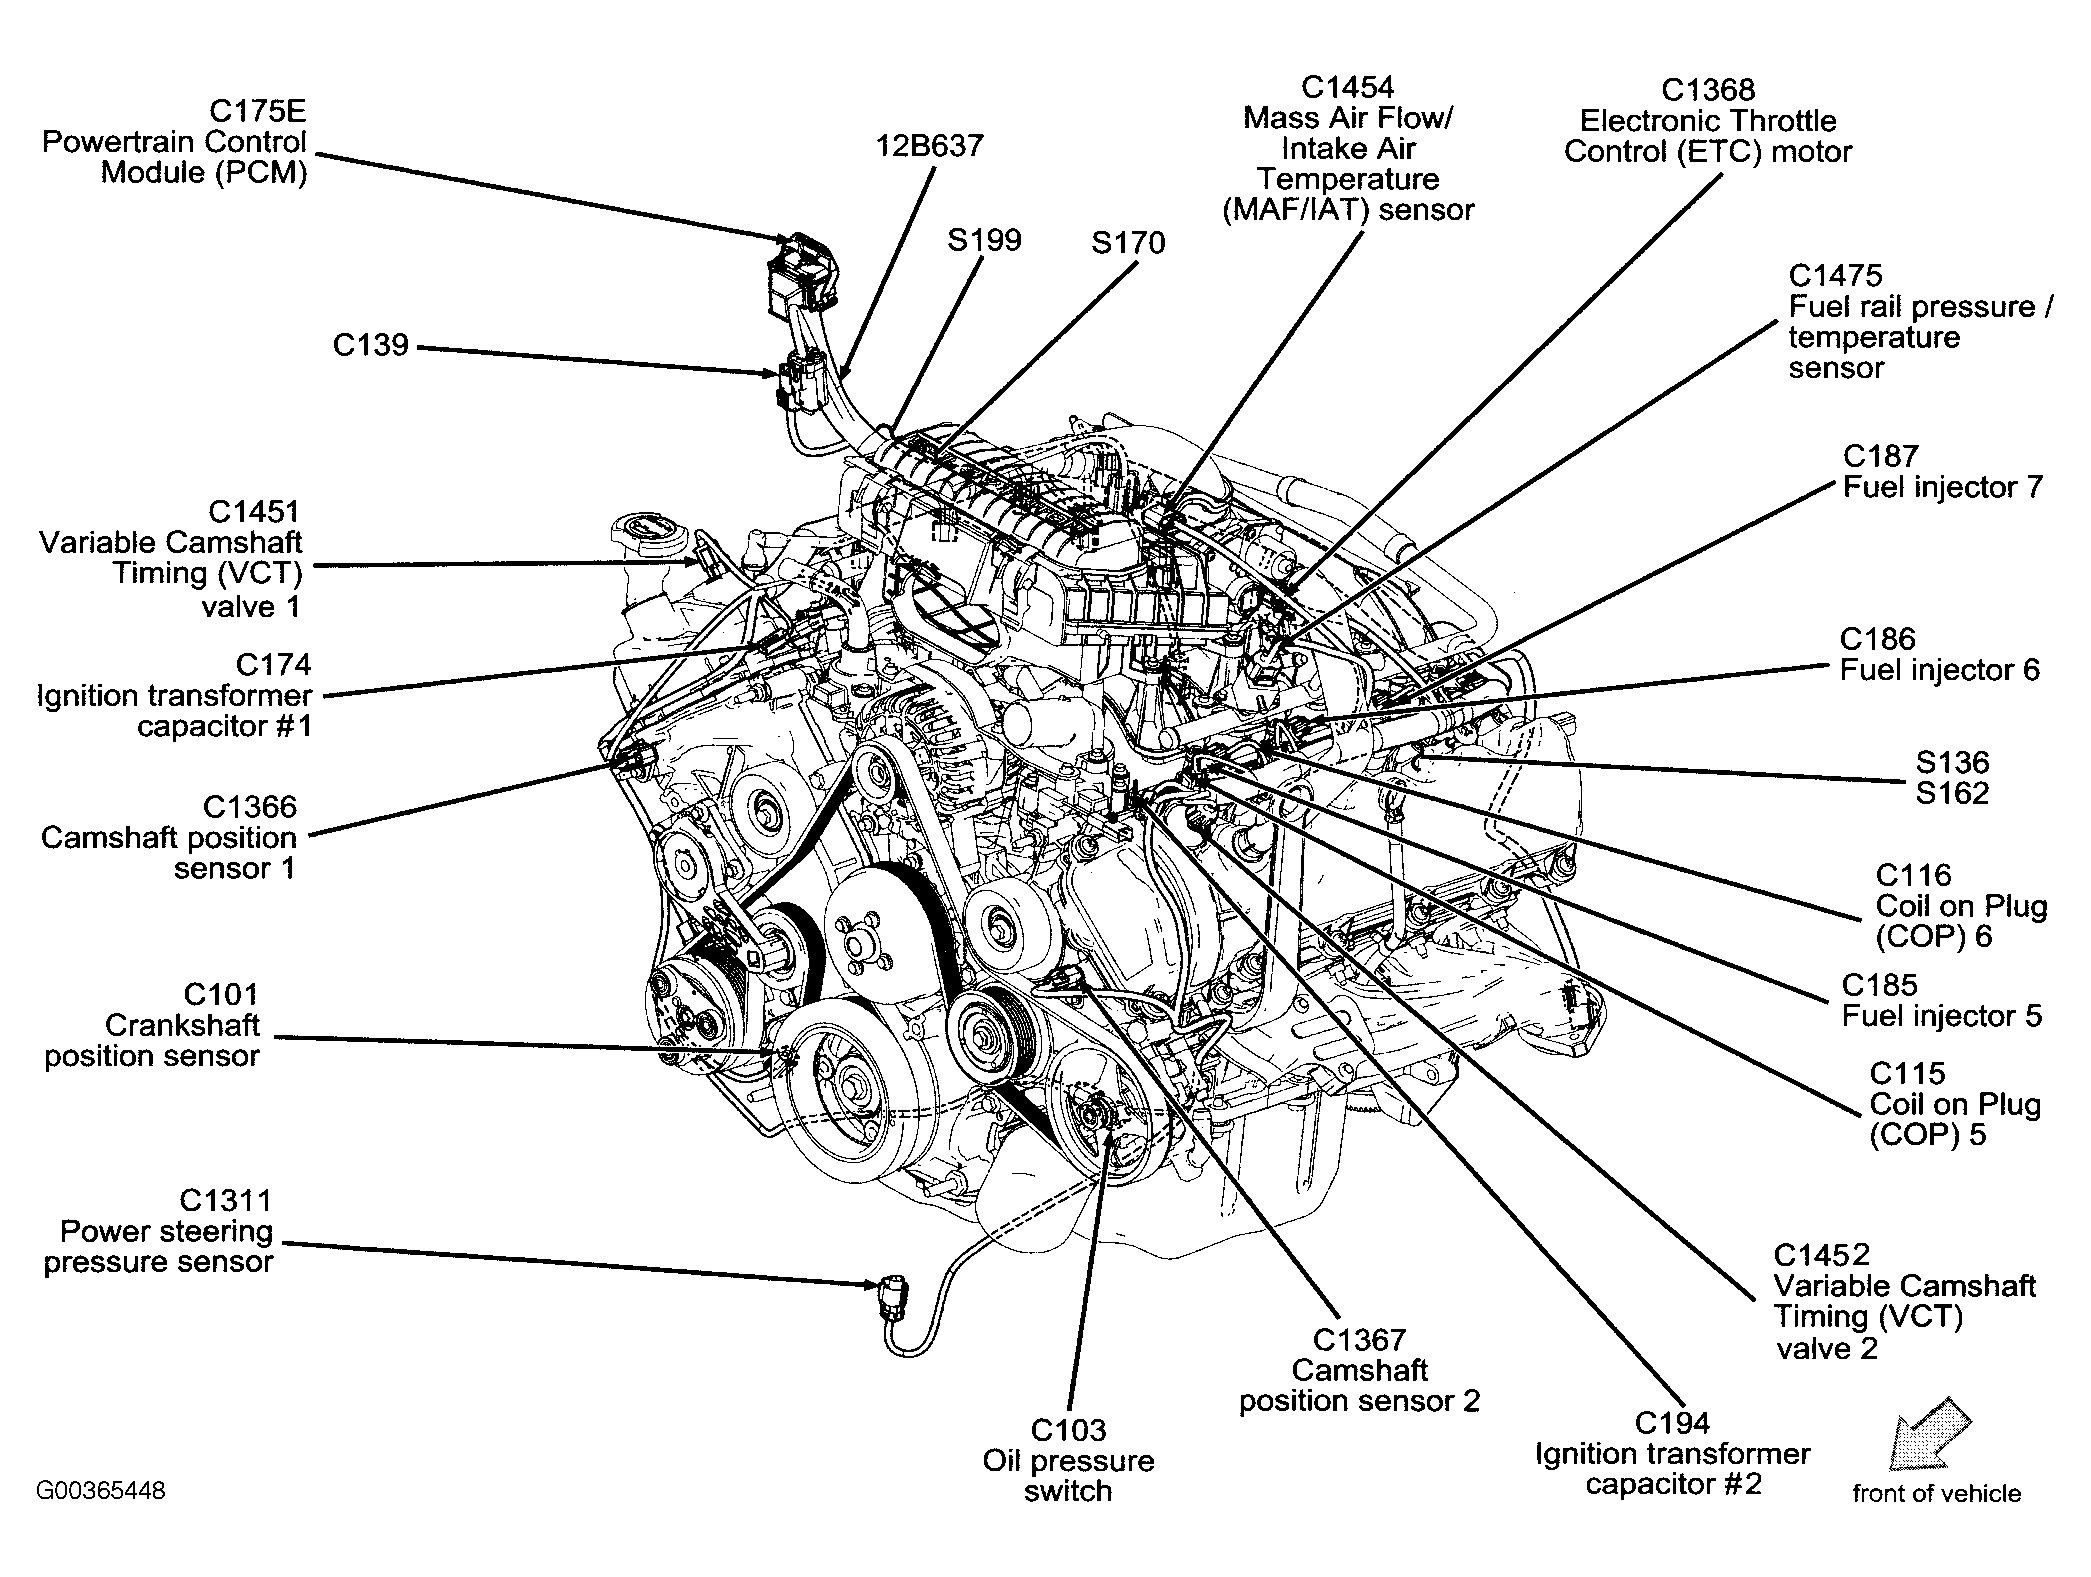 2004 ford F150 5.4 Engine Wiring Diagram Pin On Wiring Cable Of 2004 ford F150 5.4 Engine Wiring Diagram